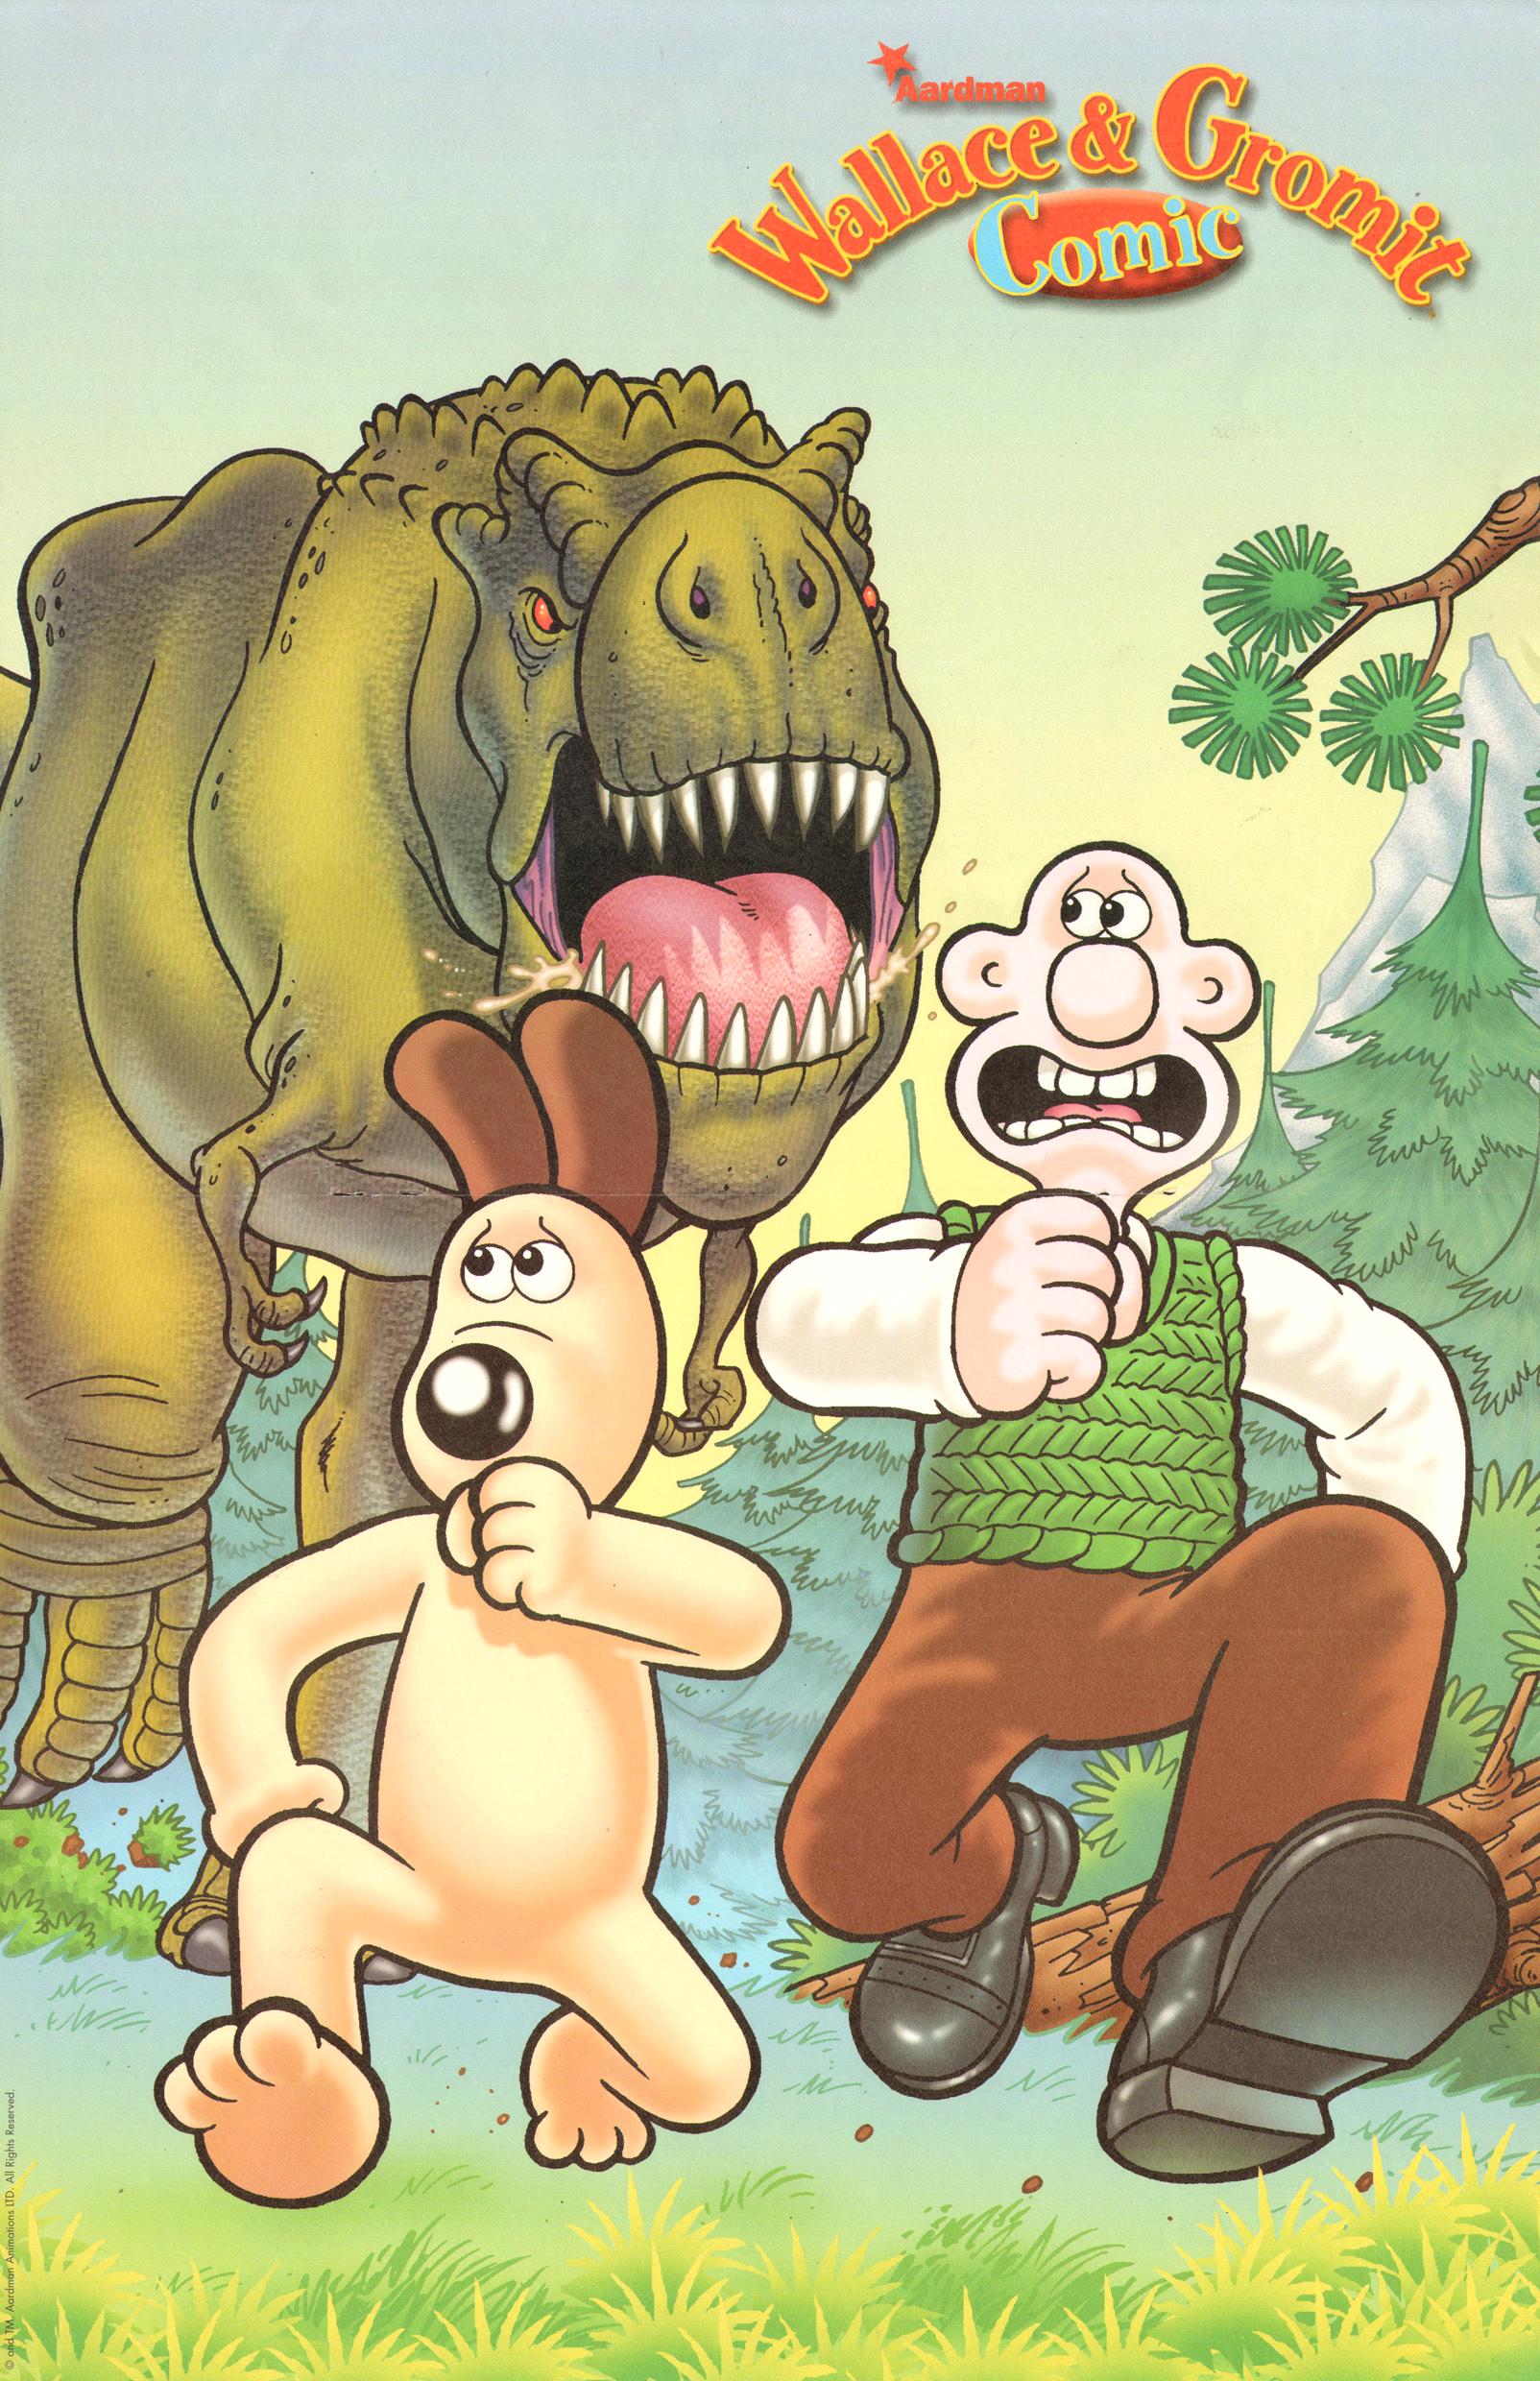 Read online Wallace & Gromit Comic comic -  Issue #11 - 26